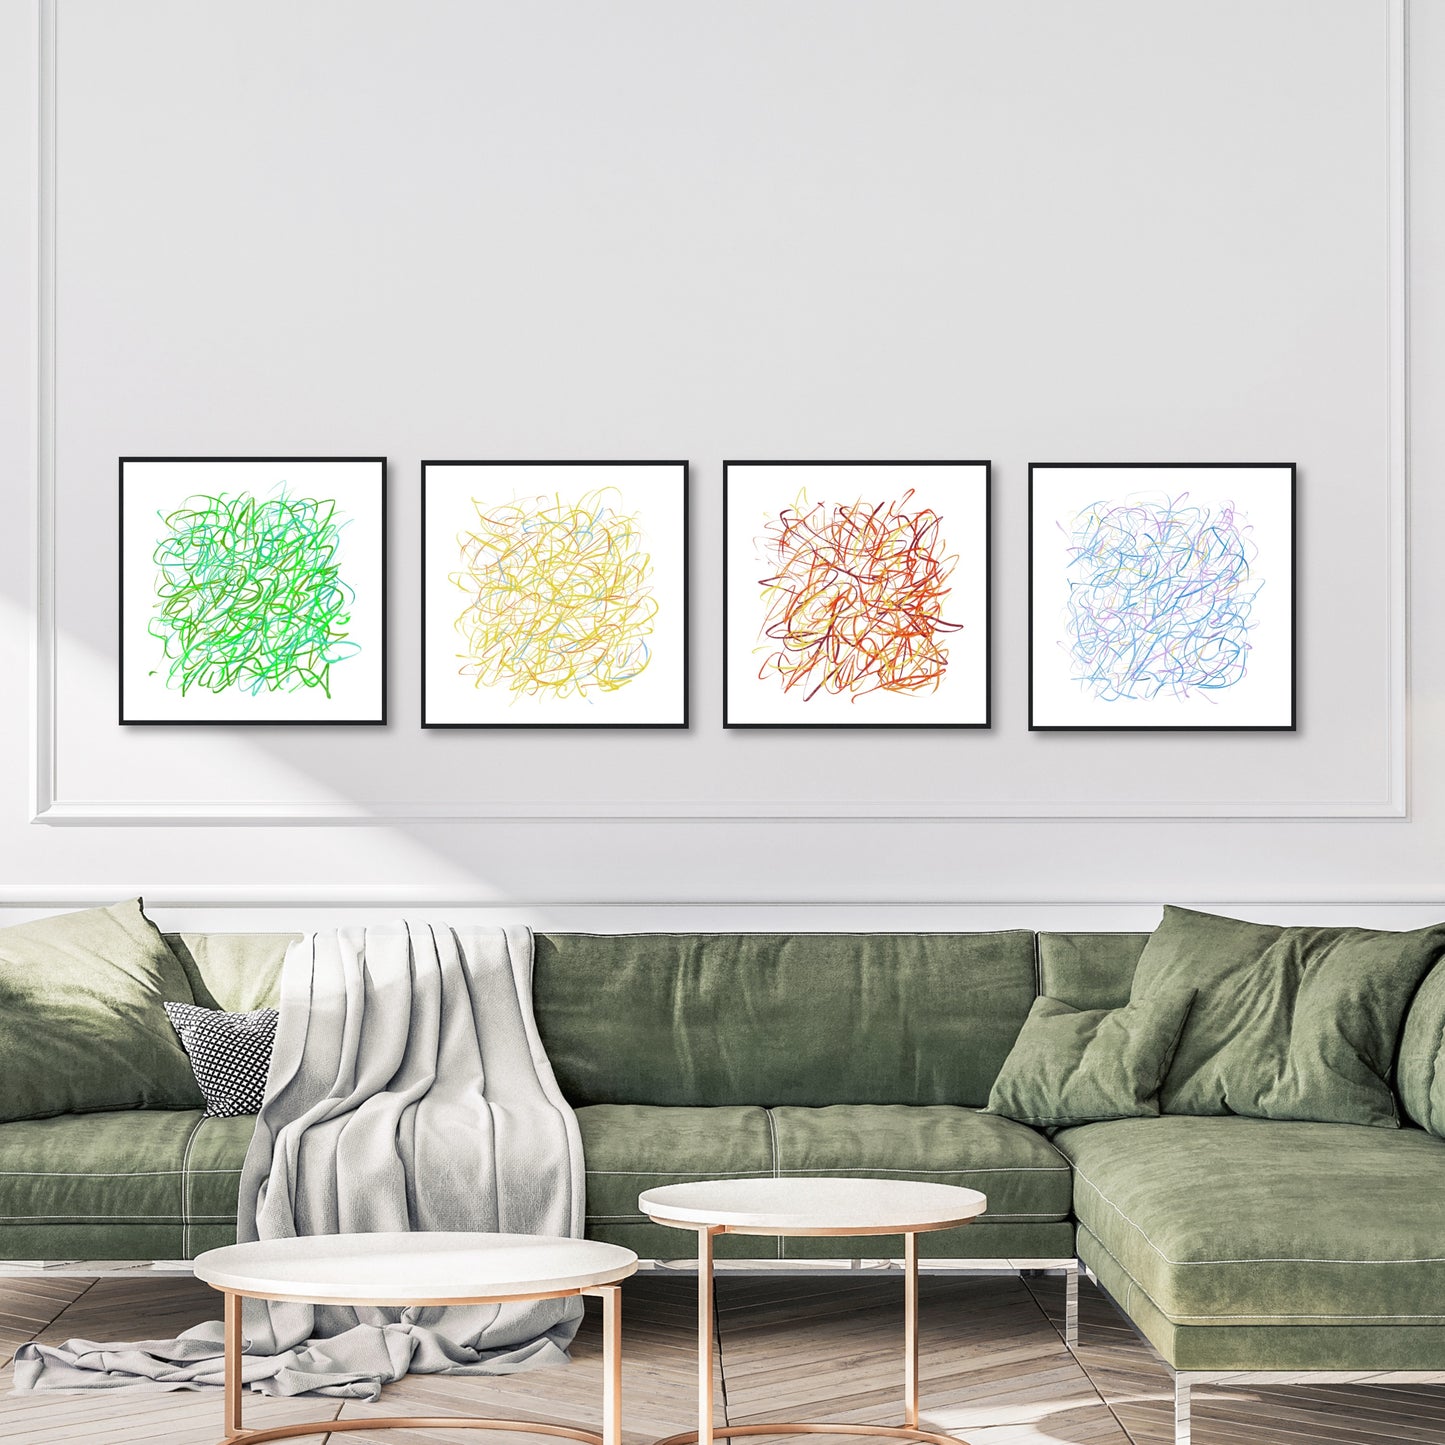 The four seasons grouped together in a row against a dark grey wall in a modern home with white sectional sofa and green cushions and throw.